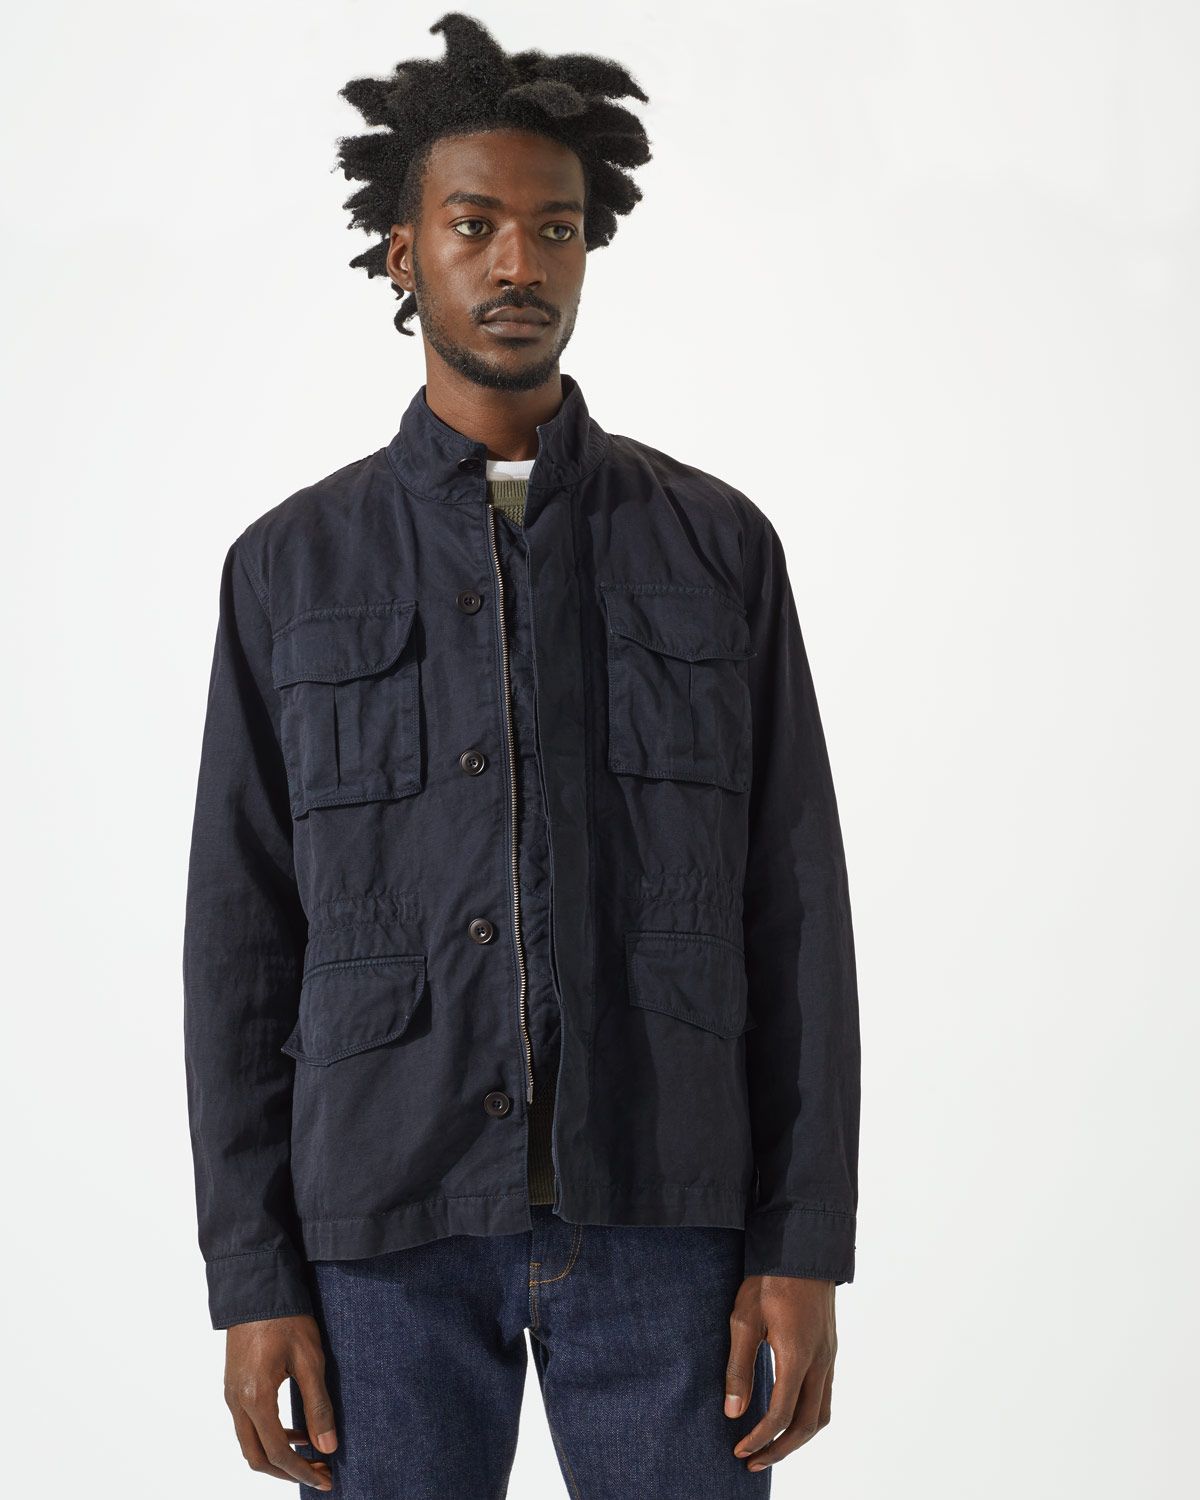 Made from a cotton linen blend, this jacket has been garment dyed for a relaxed, lived-in look. An iconic 4-pocket style with adjustable drawstring at the waist, it features a zip and button fastening at front and is unlined, making for the perfect lightweight piece this season.